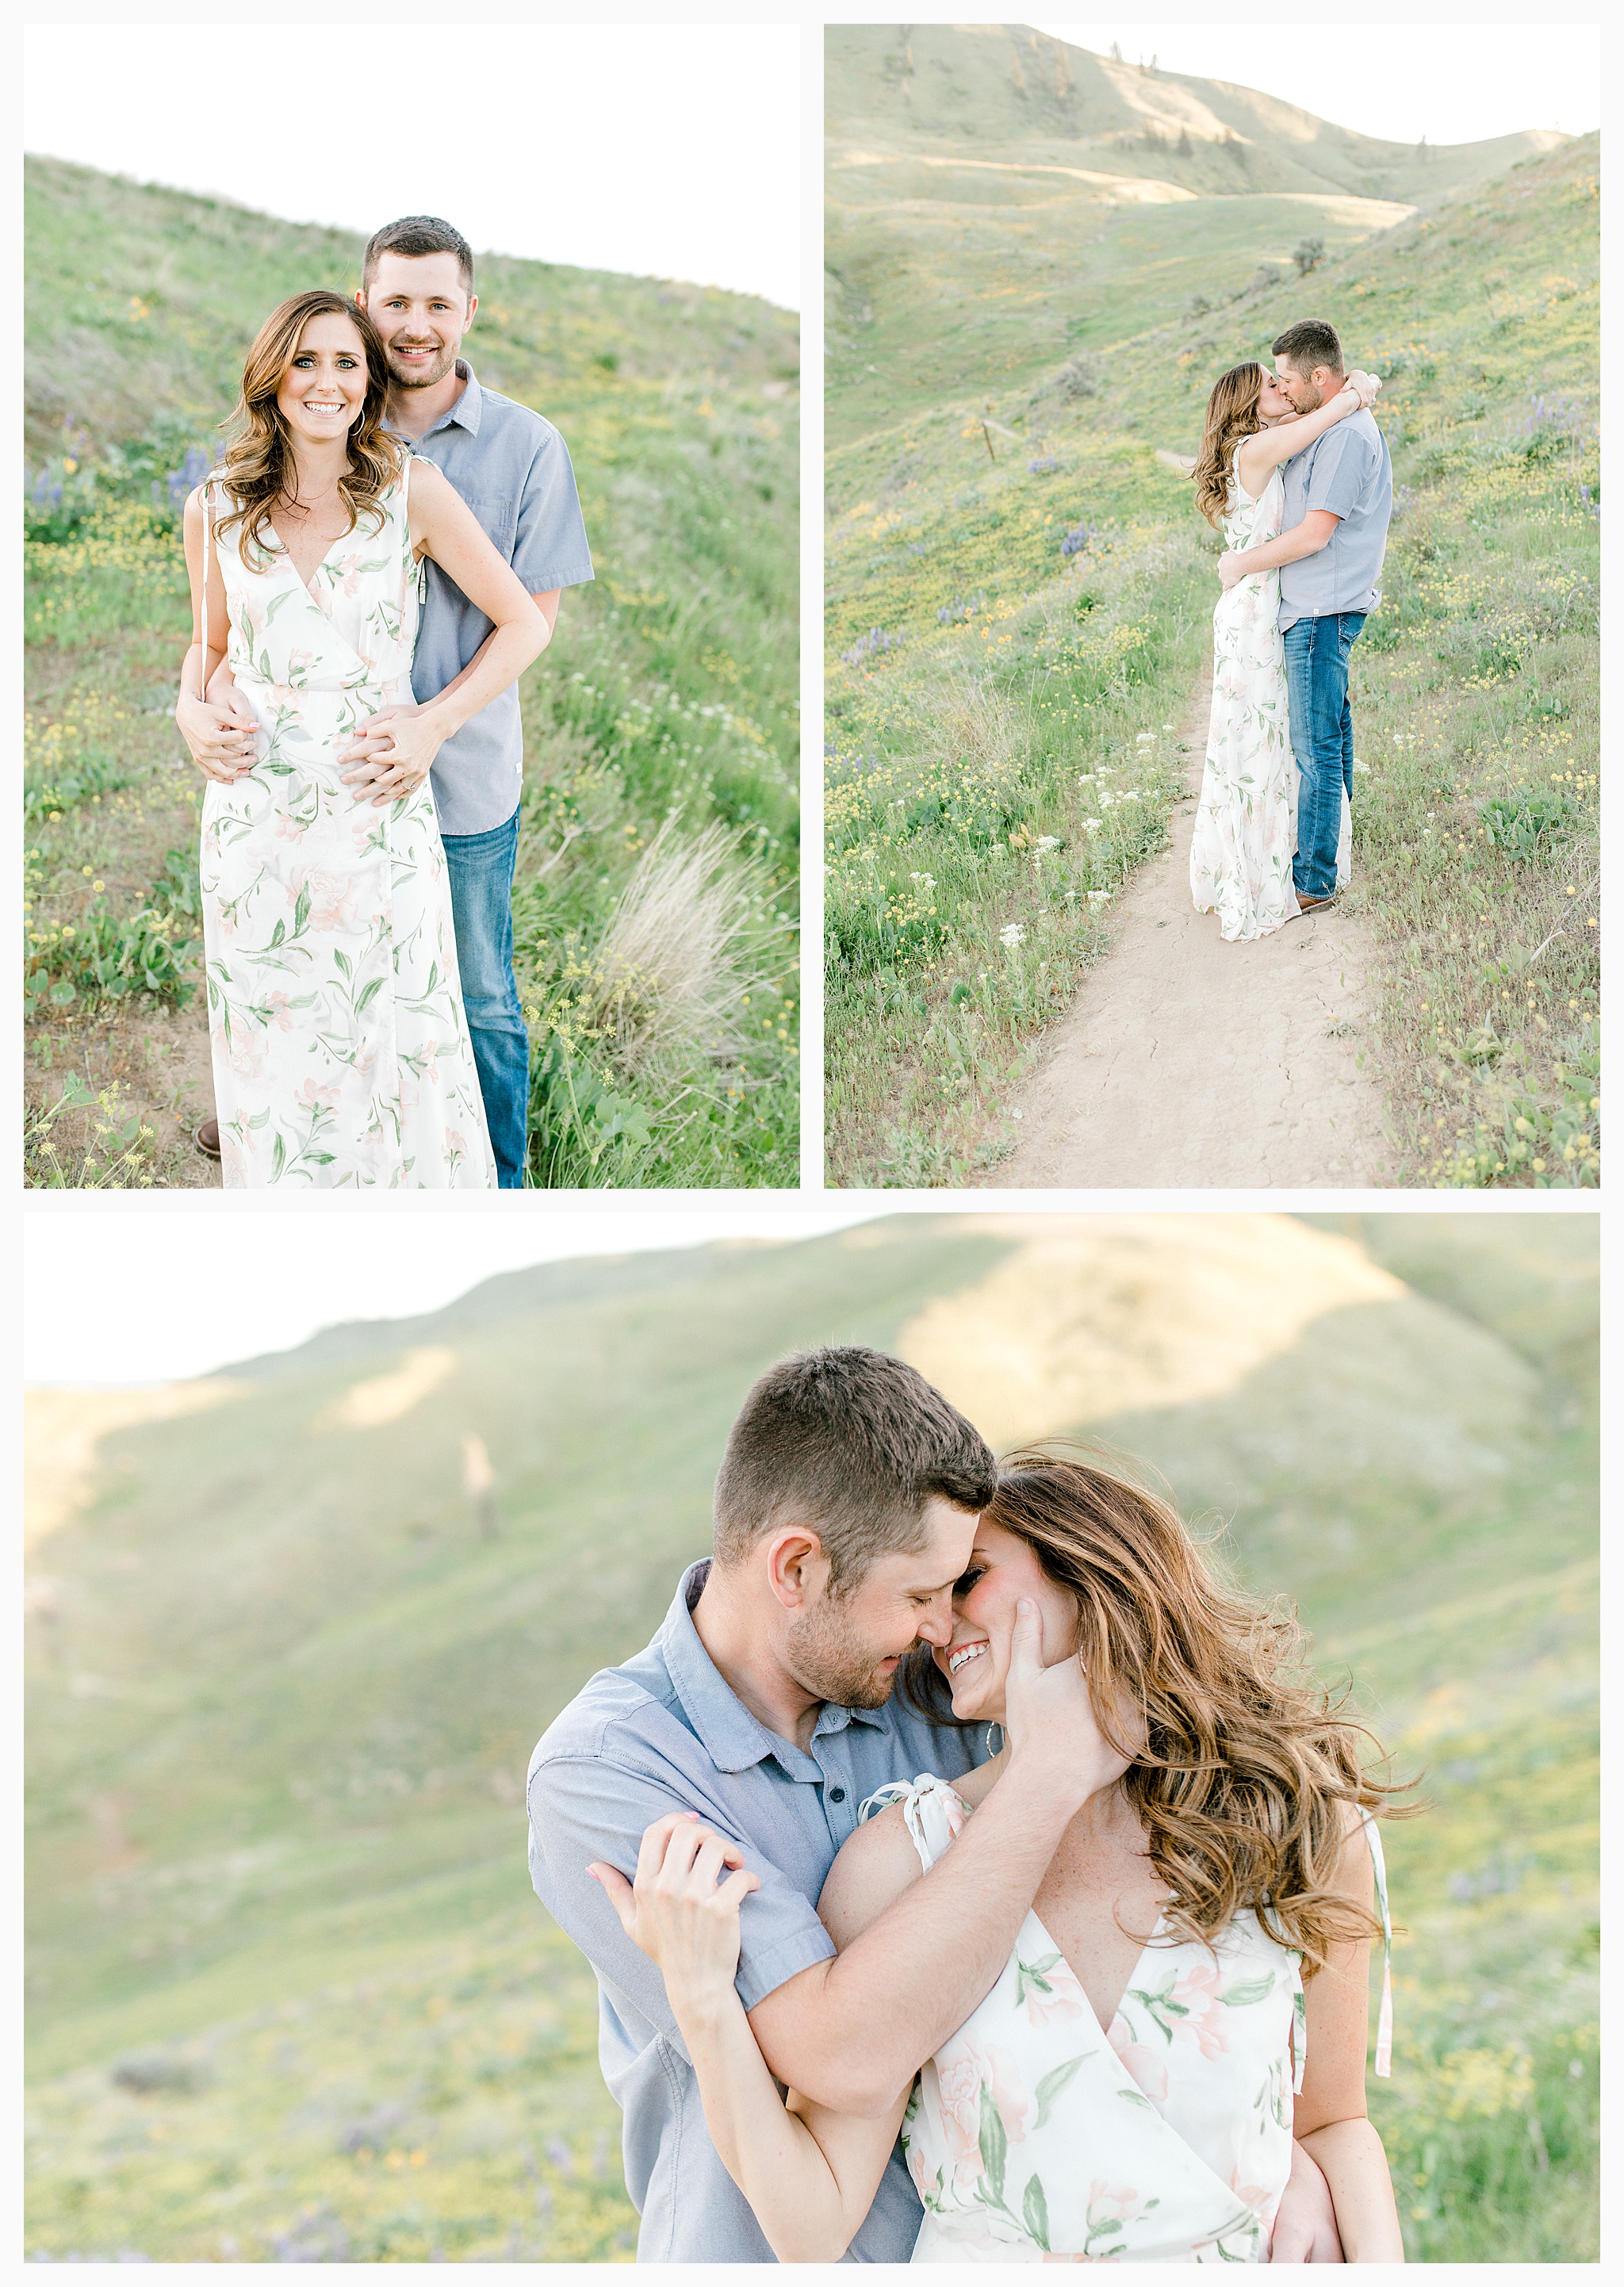 Engagement session amongst the wildflowers in Wenatchee, Washington | Engagement Session Outfit Inspiration for Wedding Photography with Emma Rose Company | Light and Airy PNW Photographer, Seattle Bride_0007.jpg